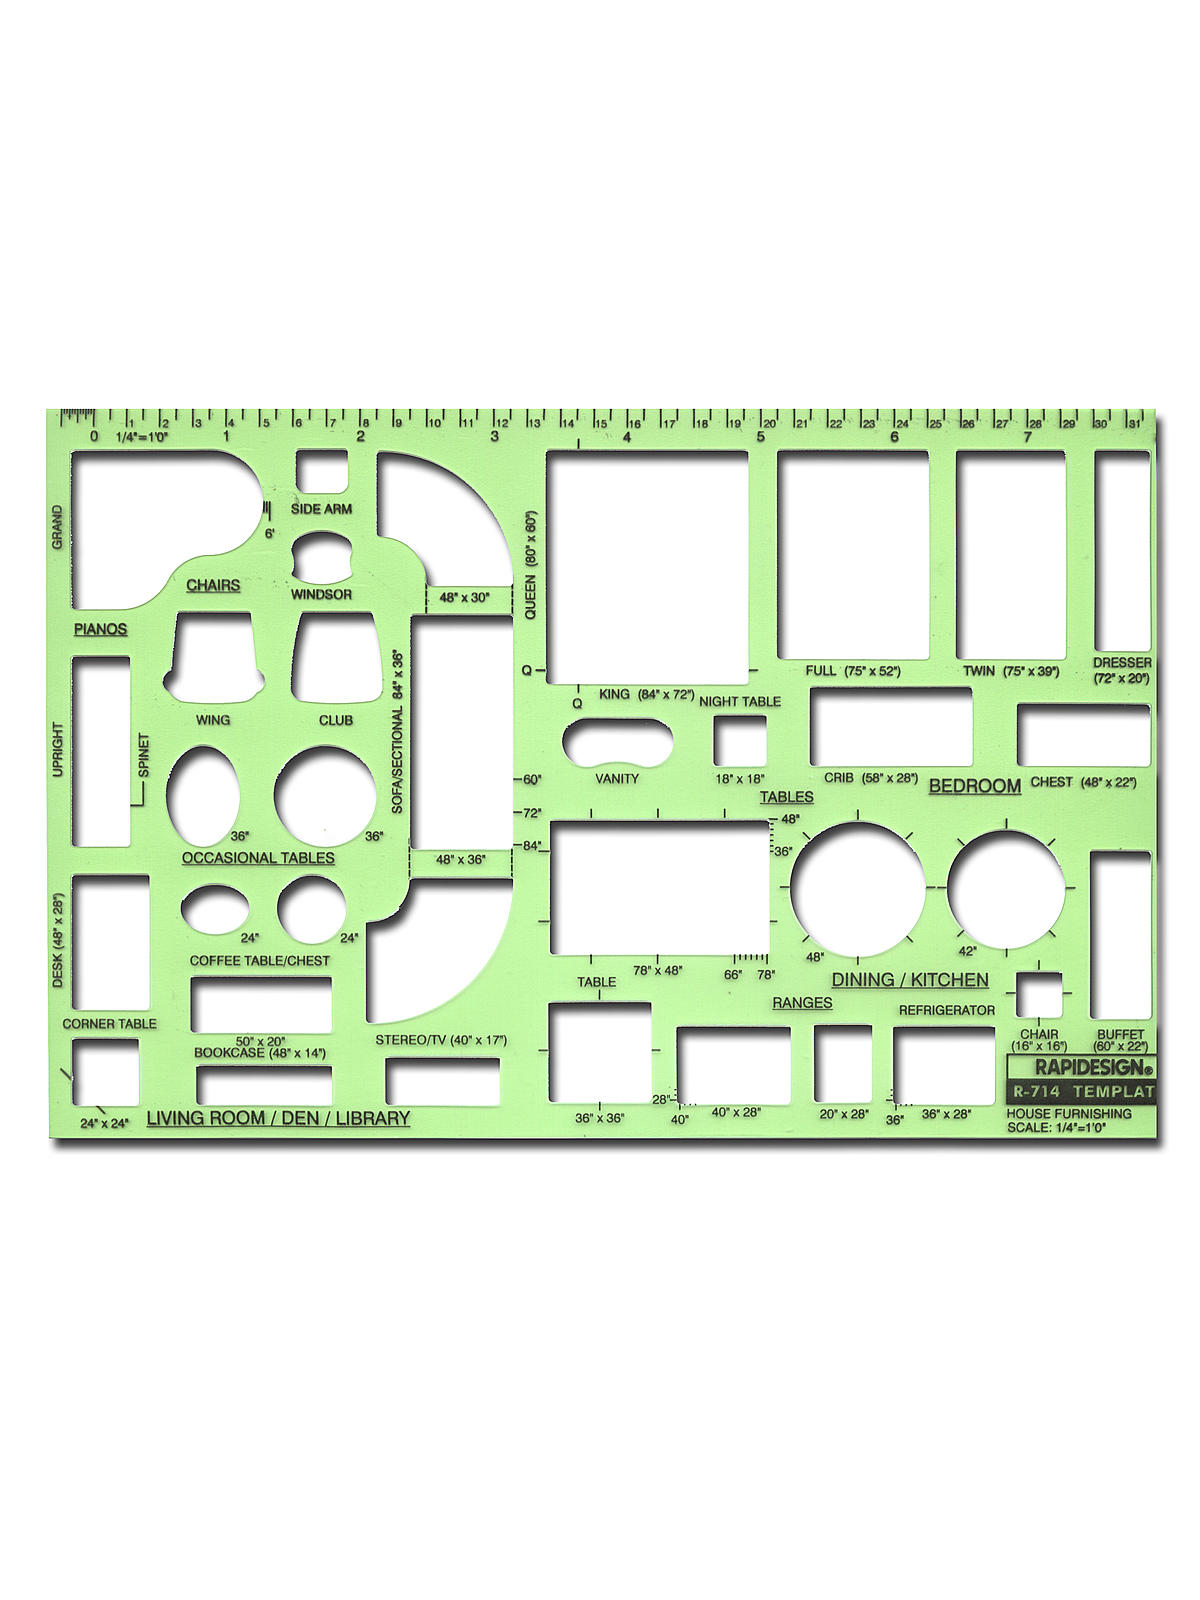 Interior Drafting And Design Templates House Furnishings 1 4 In. = 1 Ft.